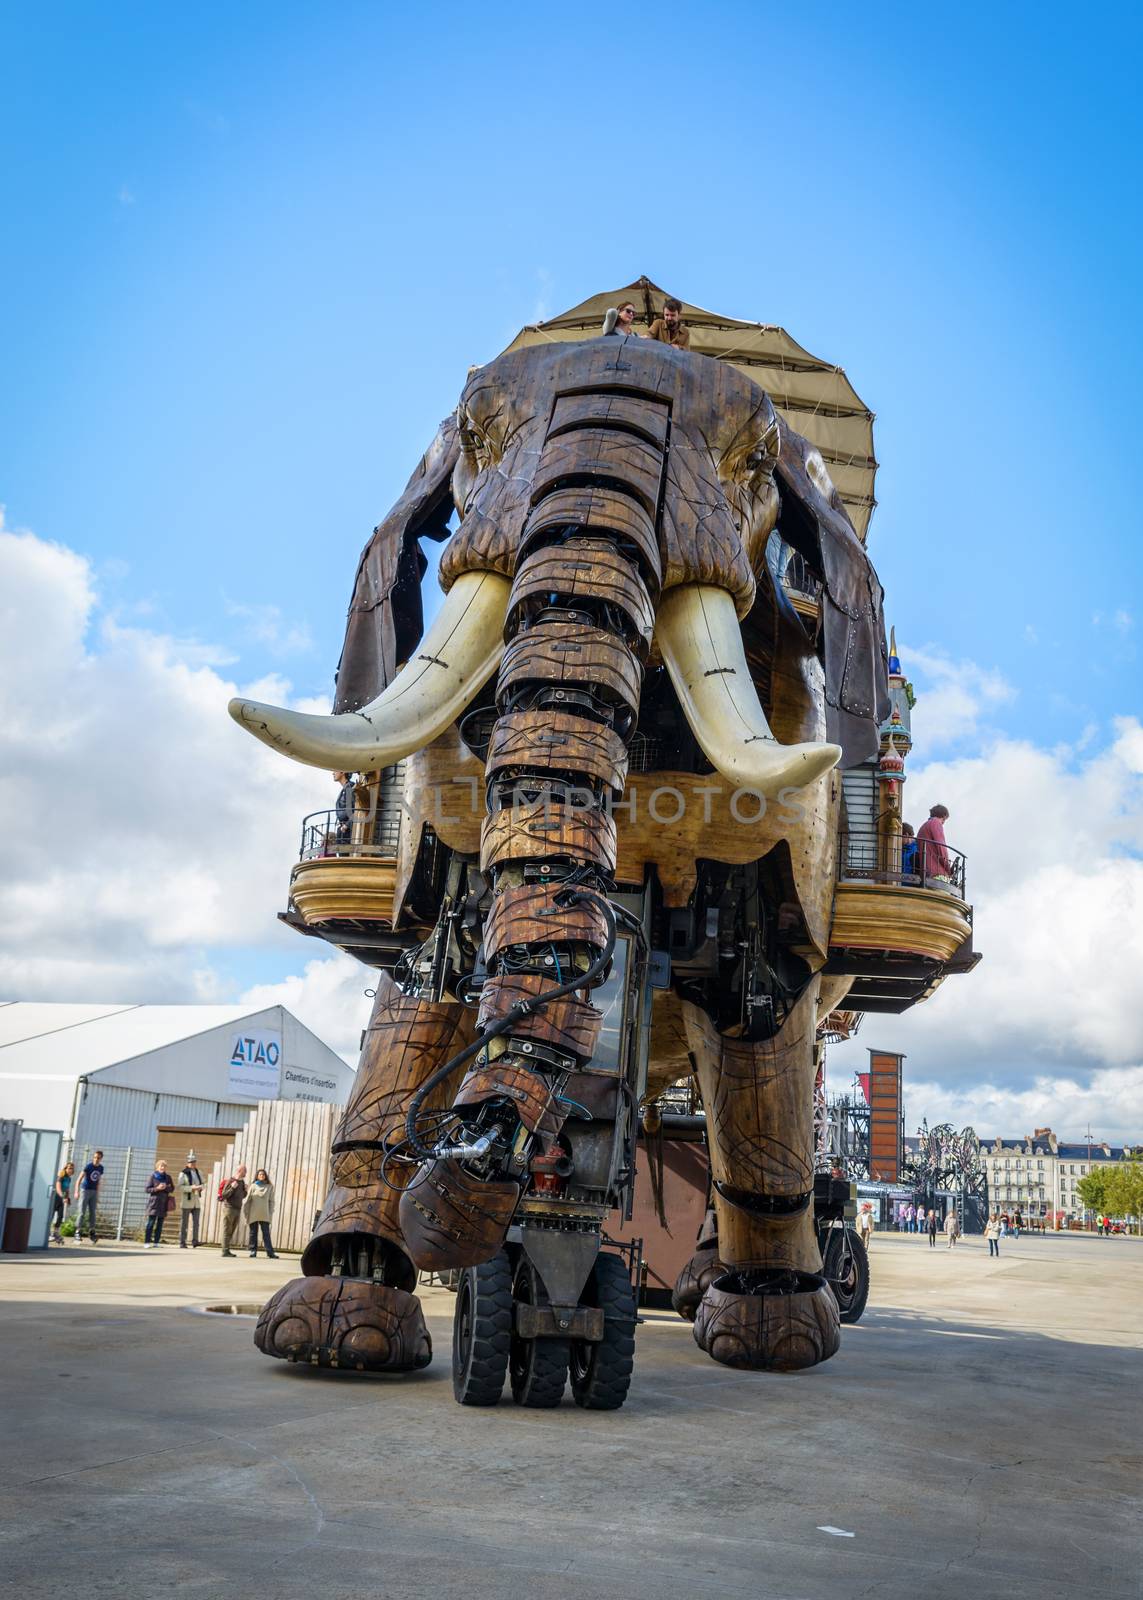 The Great Elephant of Nantes by dutourdumonde